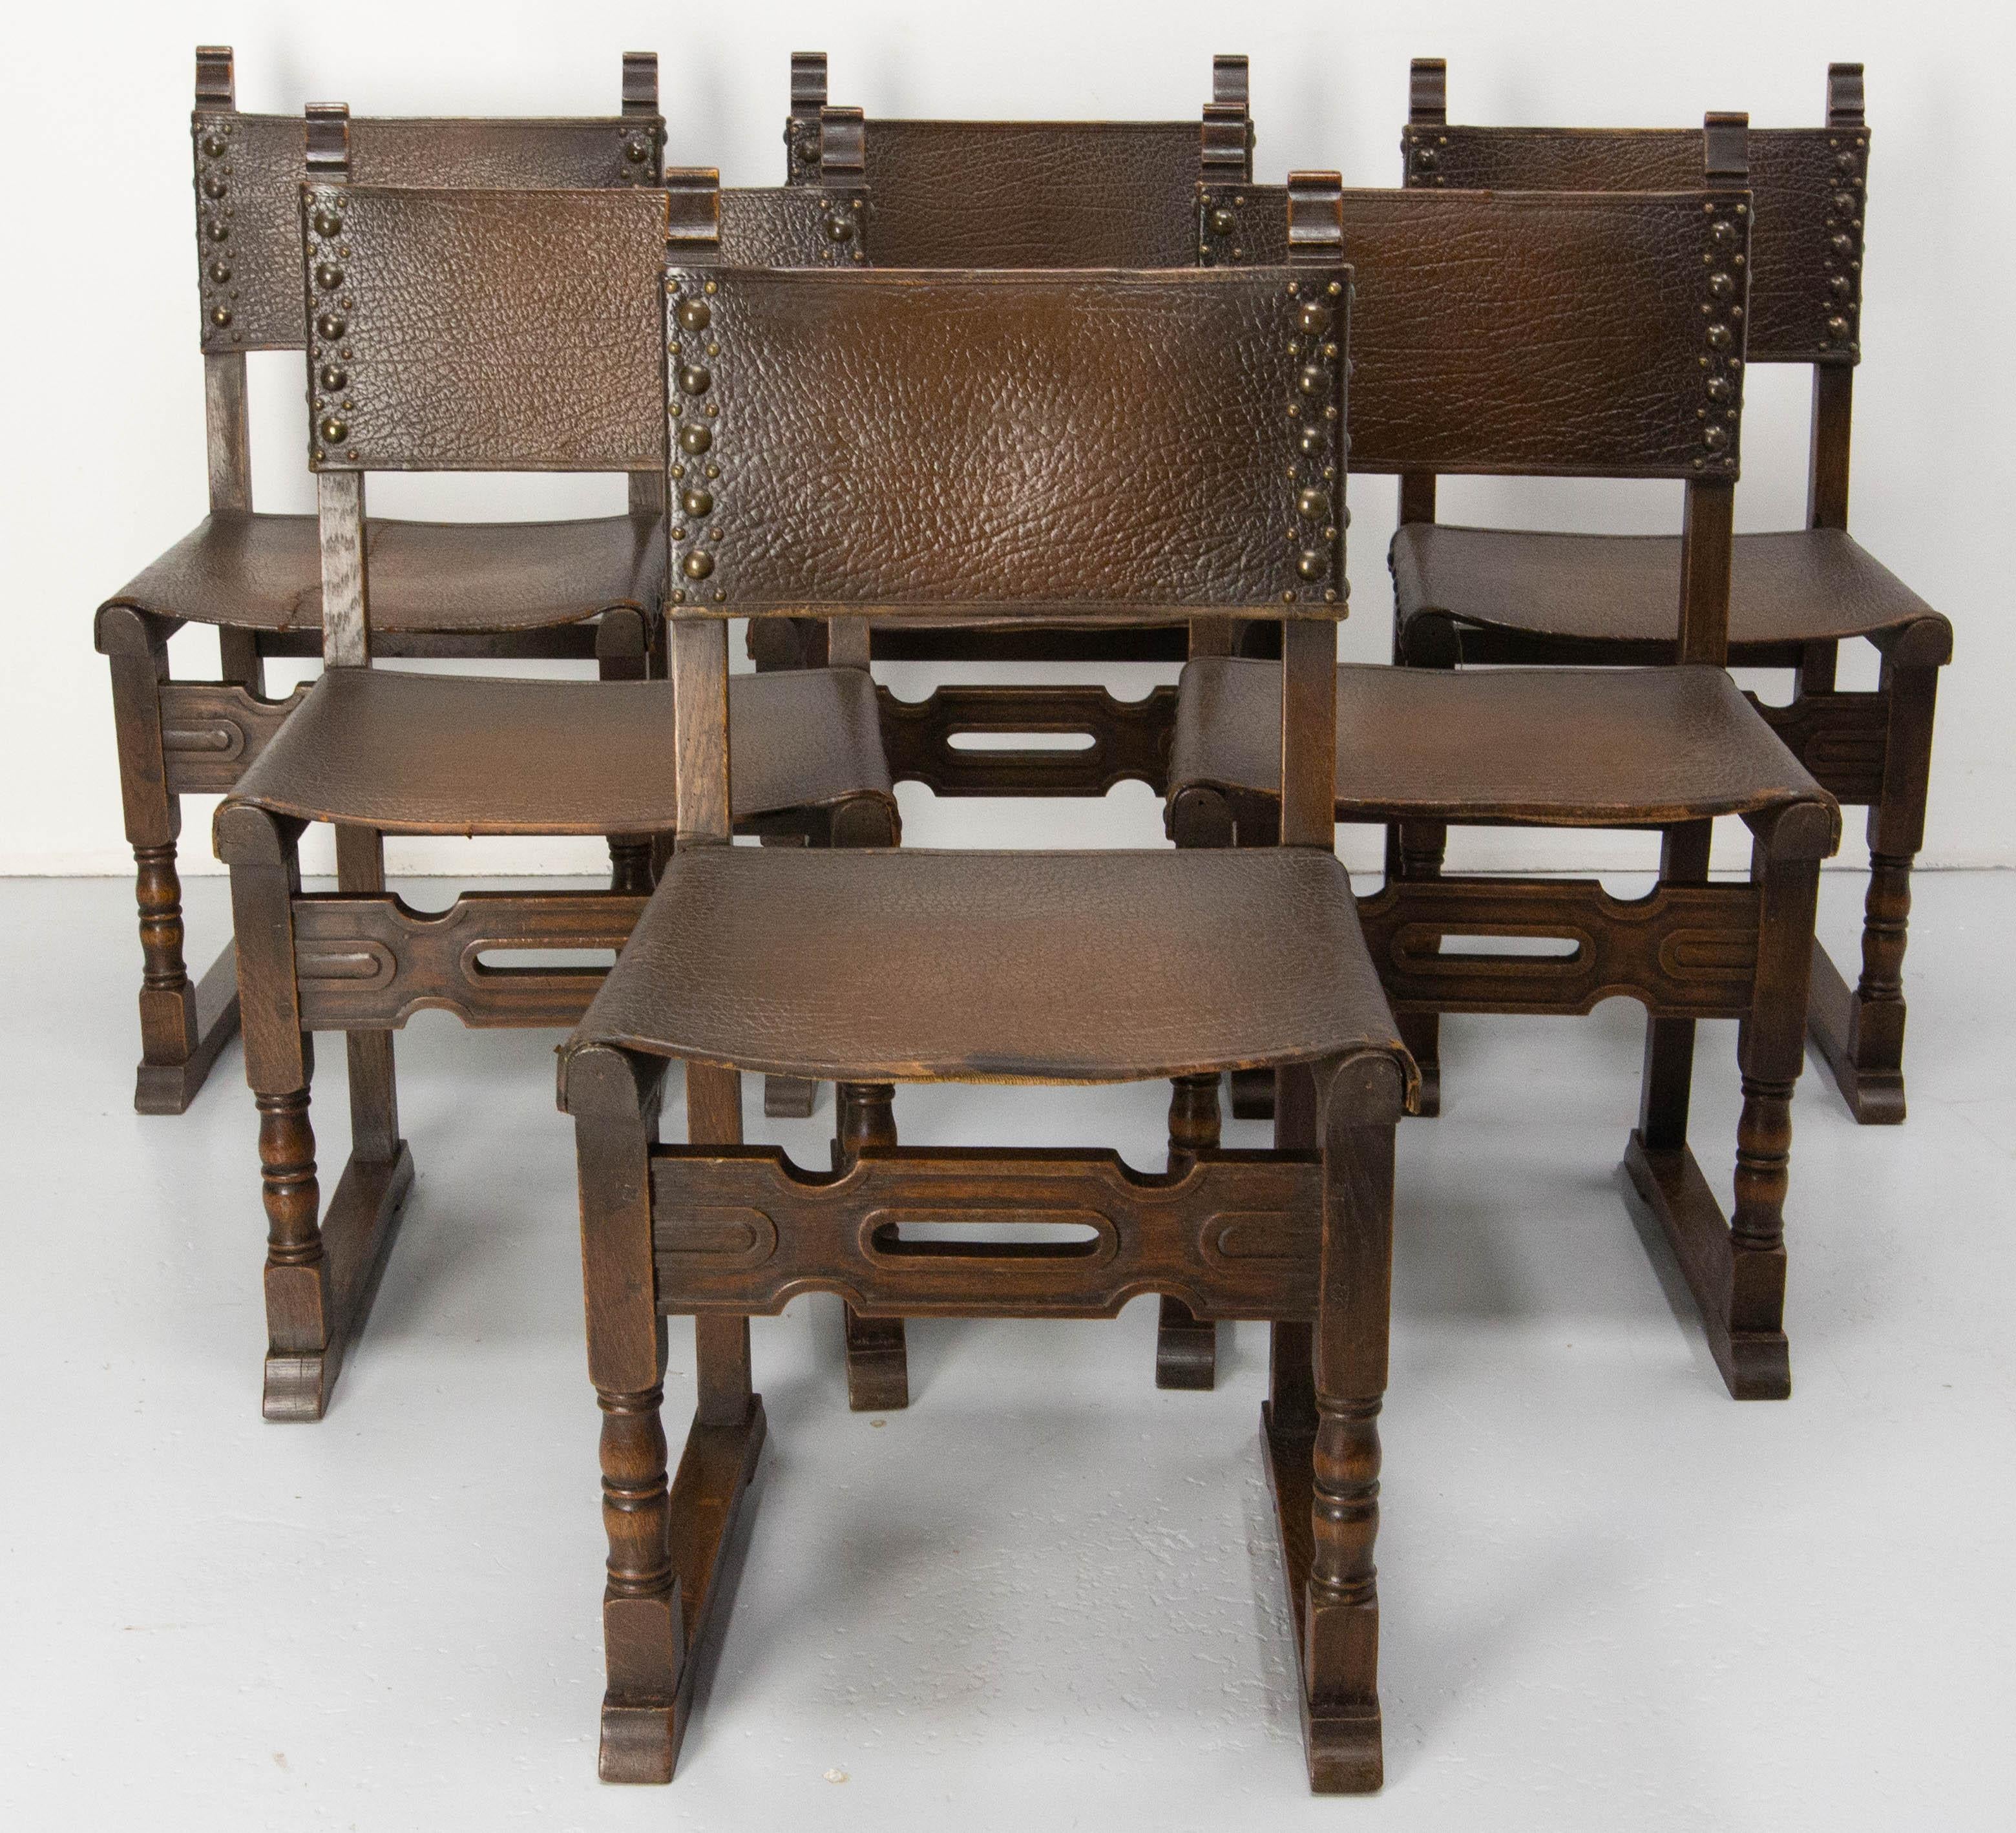 Colonial Revival Six Dining Chairs Antique Mid-20th Century Spanish Studs Leather & Chestnut